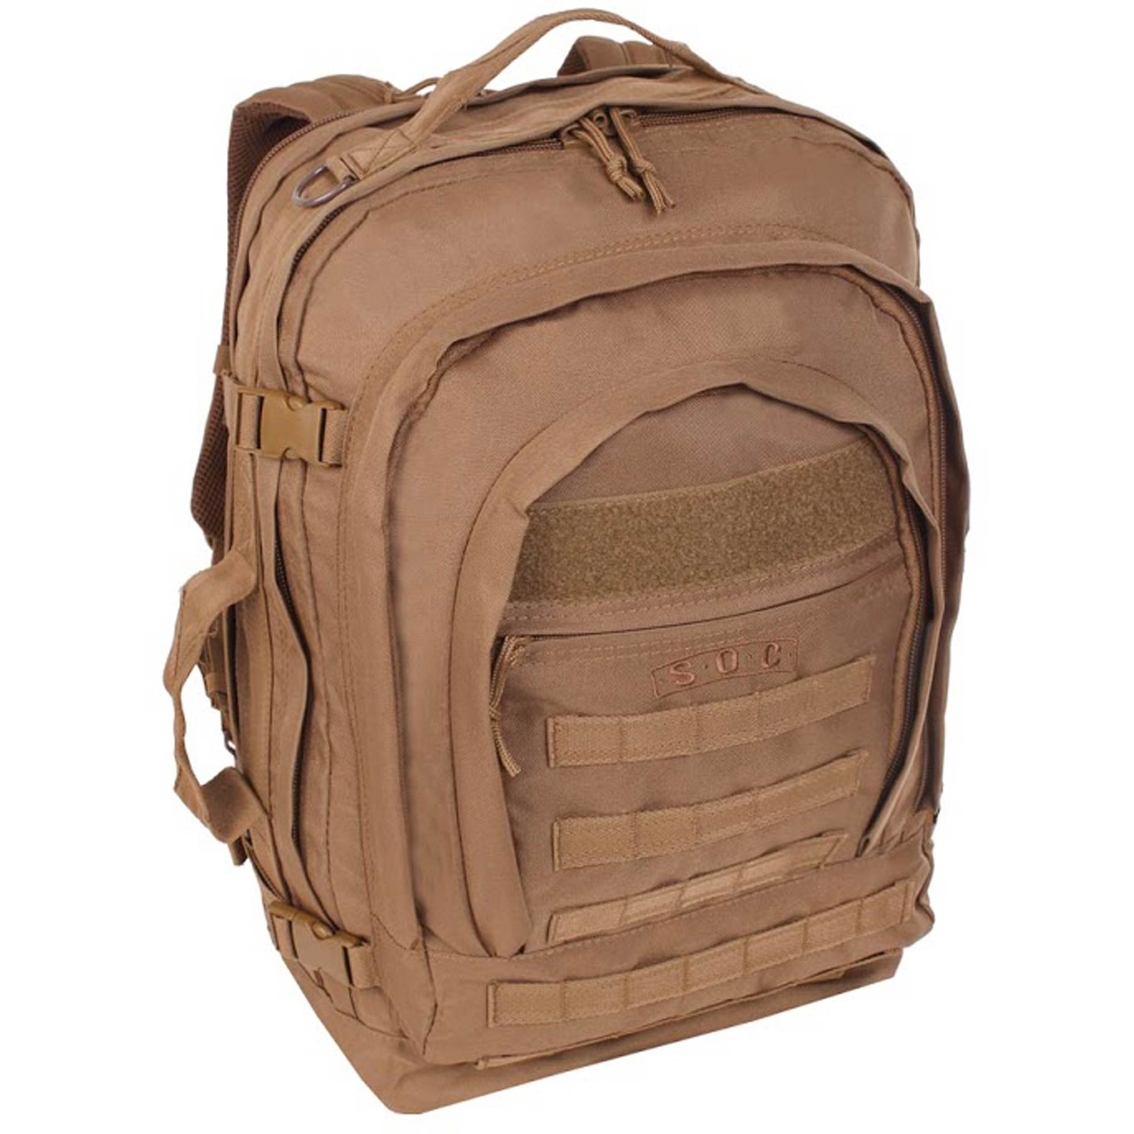 Sandpiper Of California Bugout Bag, Backpacks, Clothing & Accessories